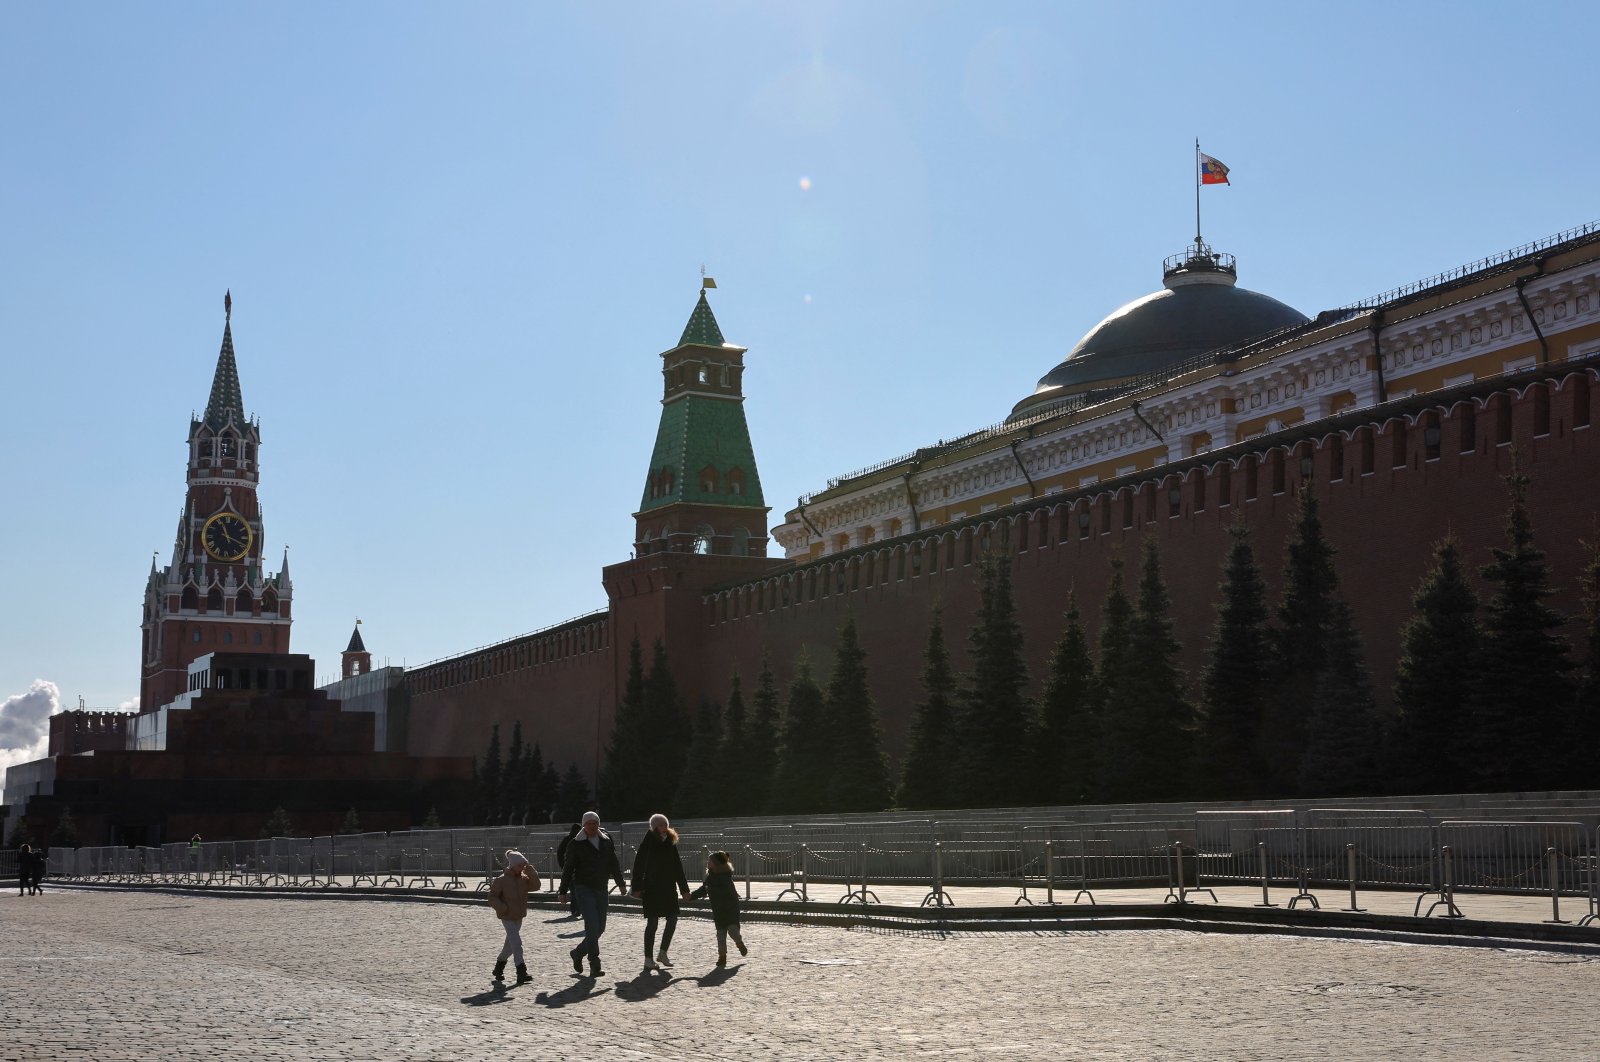 People walk in Red Square near the Kremlin Wall in central Moscow, Russia, March 9, 2022. (Reuters Photo)